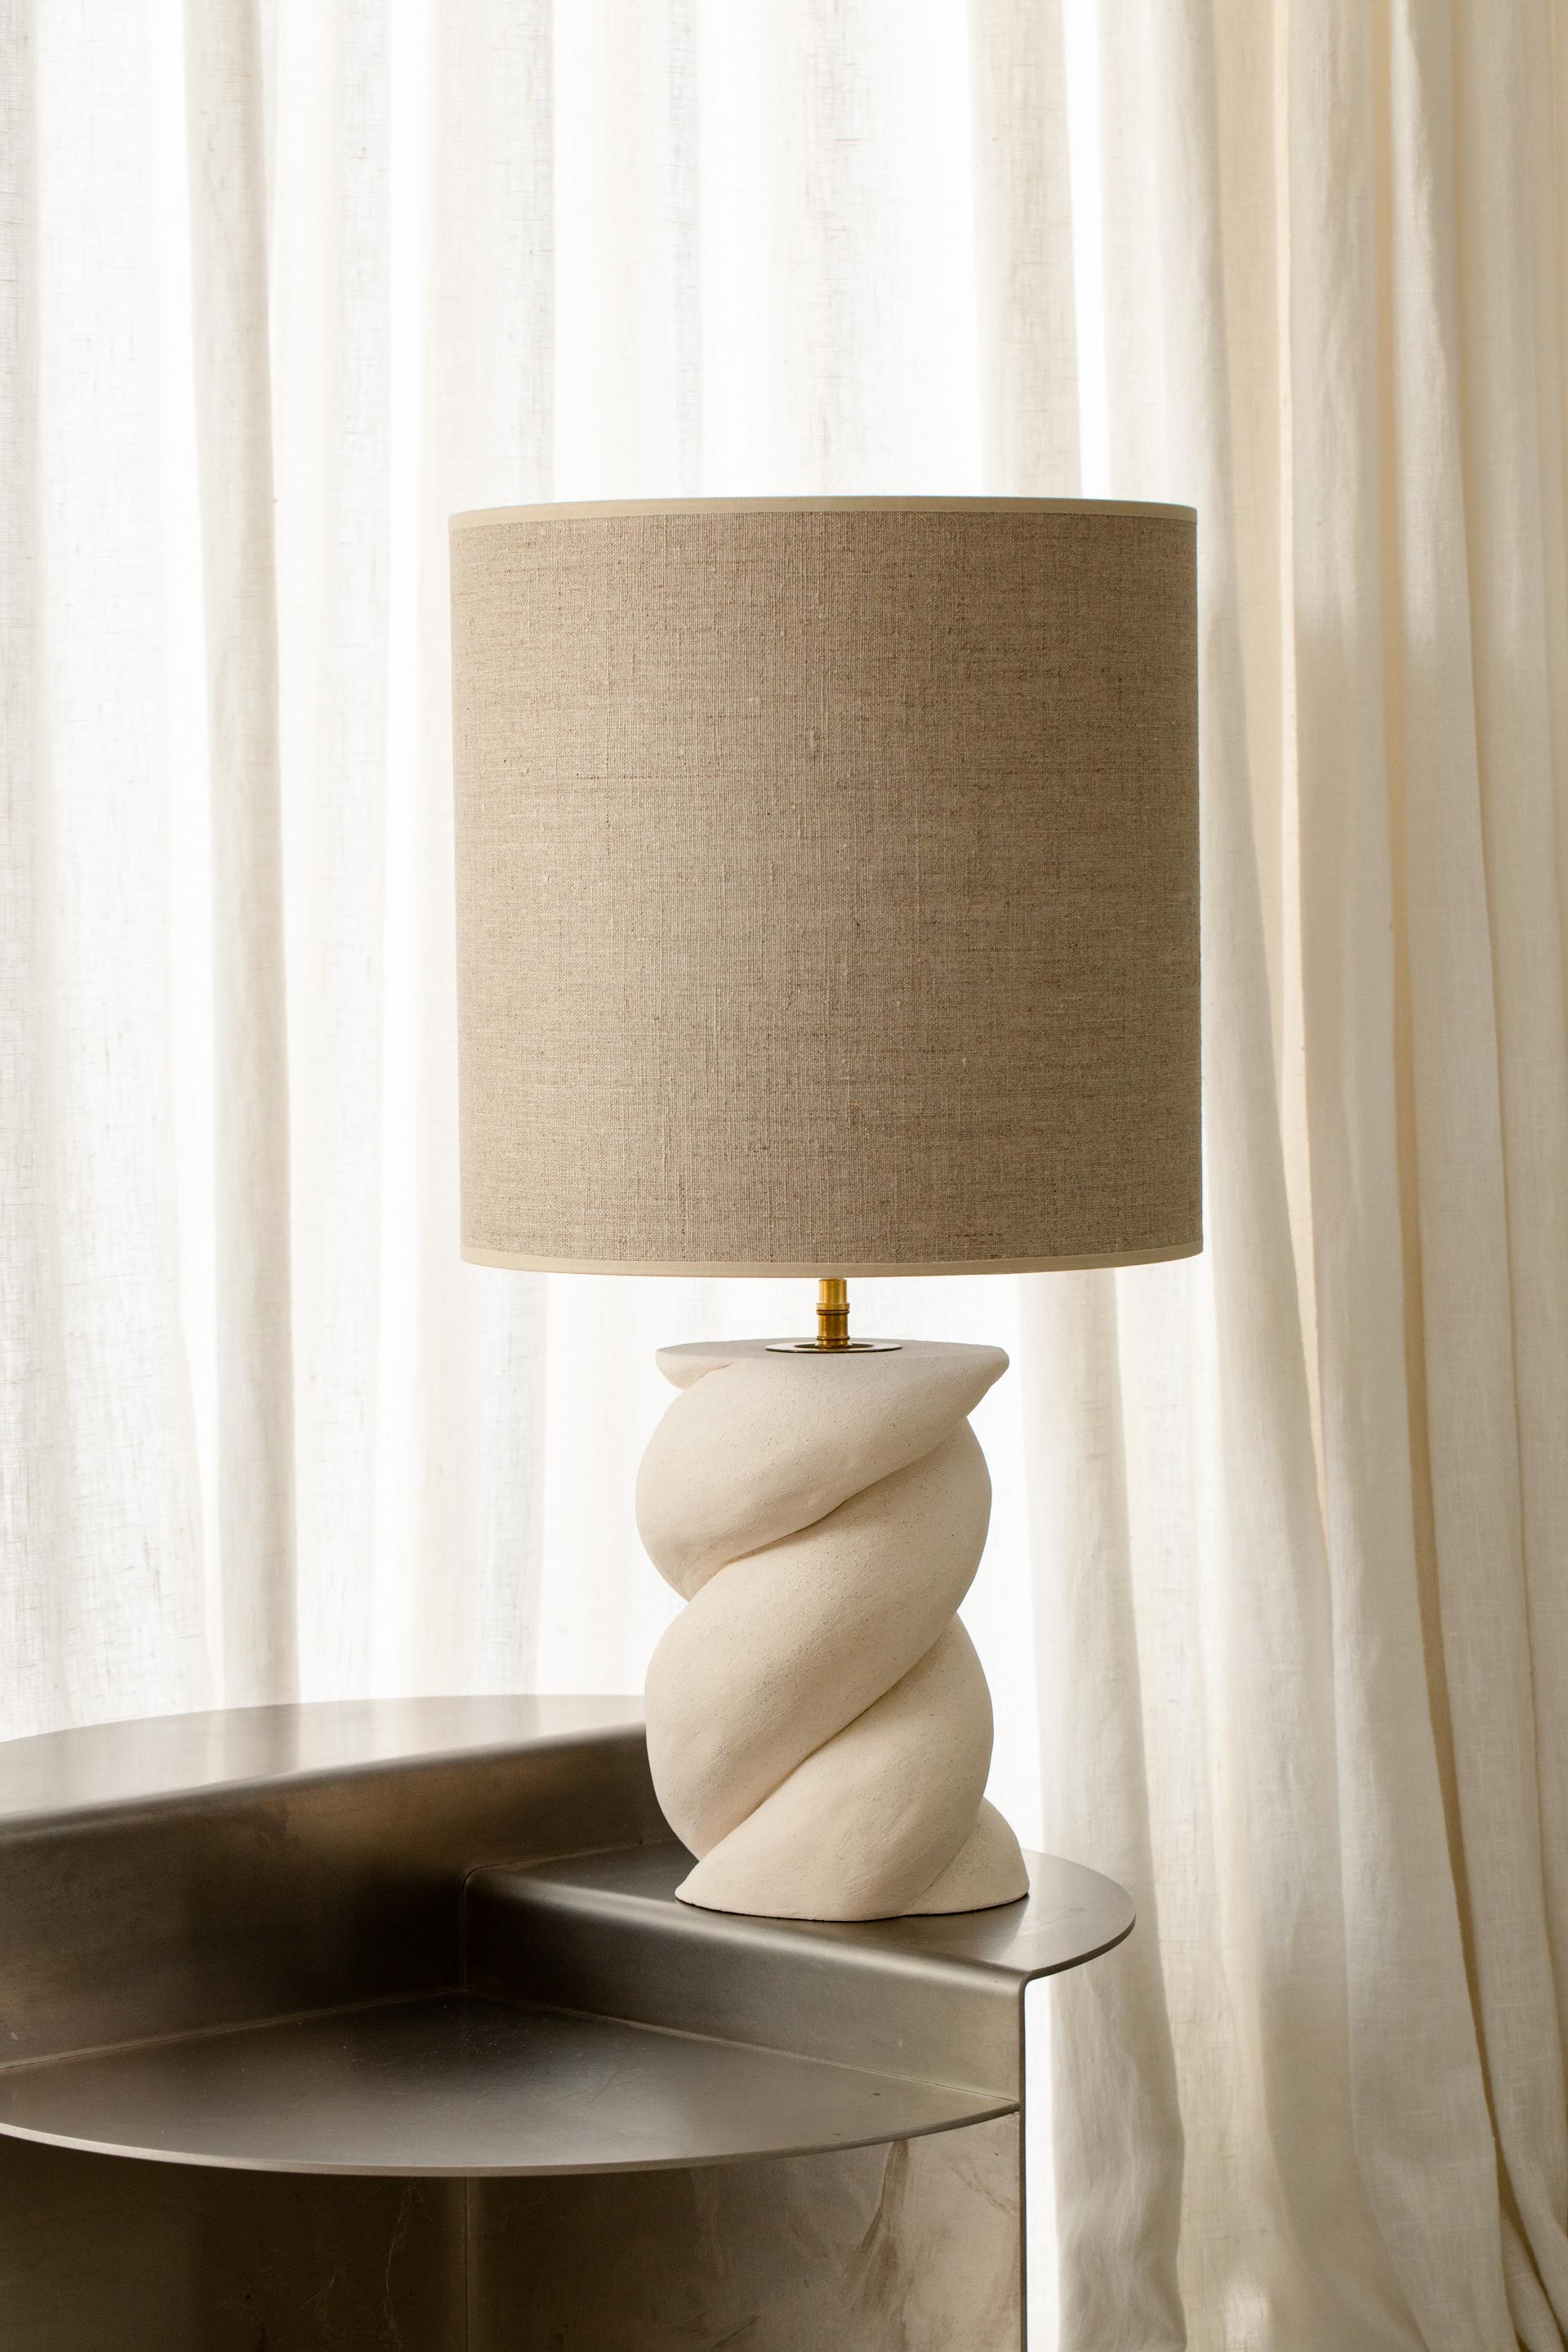 Babka Table Lamp by Di Fretto
Dimensions: ⌀ 14 x H 53 cm (measure without lampshade)
Materials: White Faience (not glazed)

The Babka table lamp is a twist in white earthenware. Representation of life, it evokes the twist of DNA.

The lampshade is a